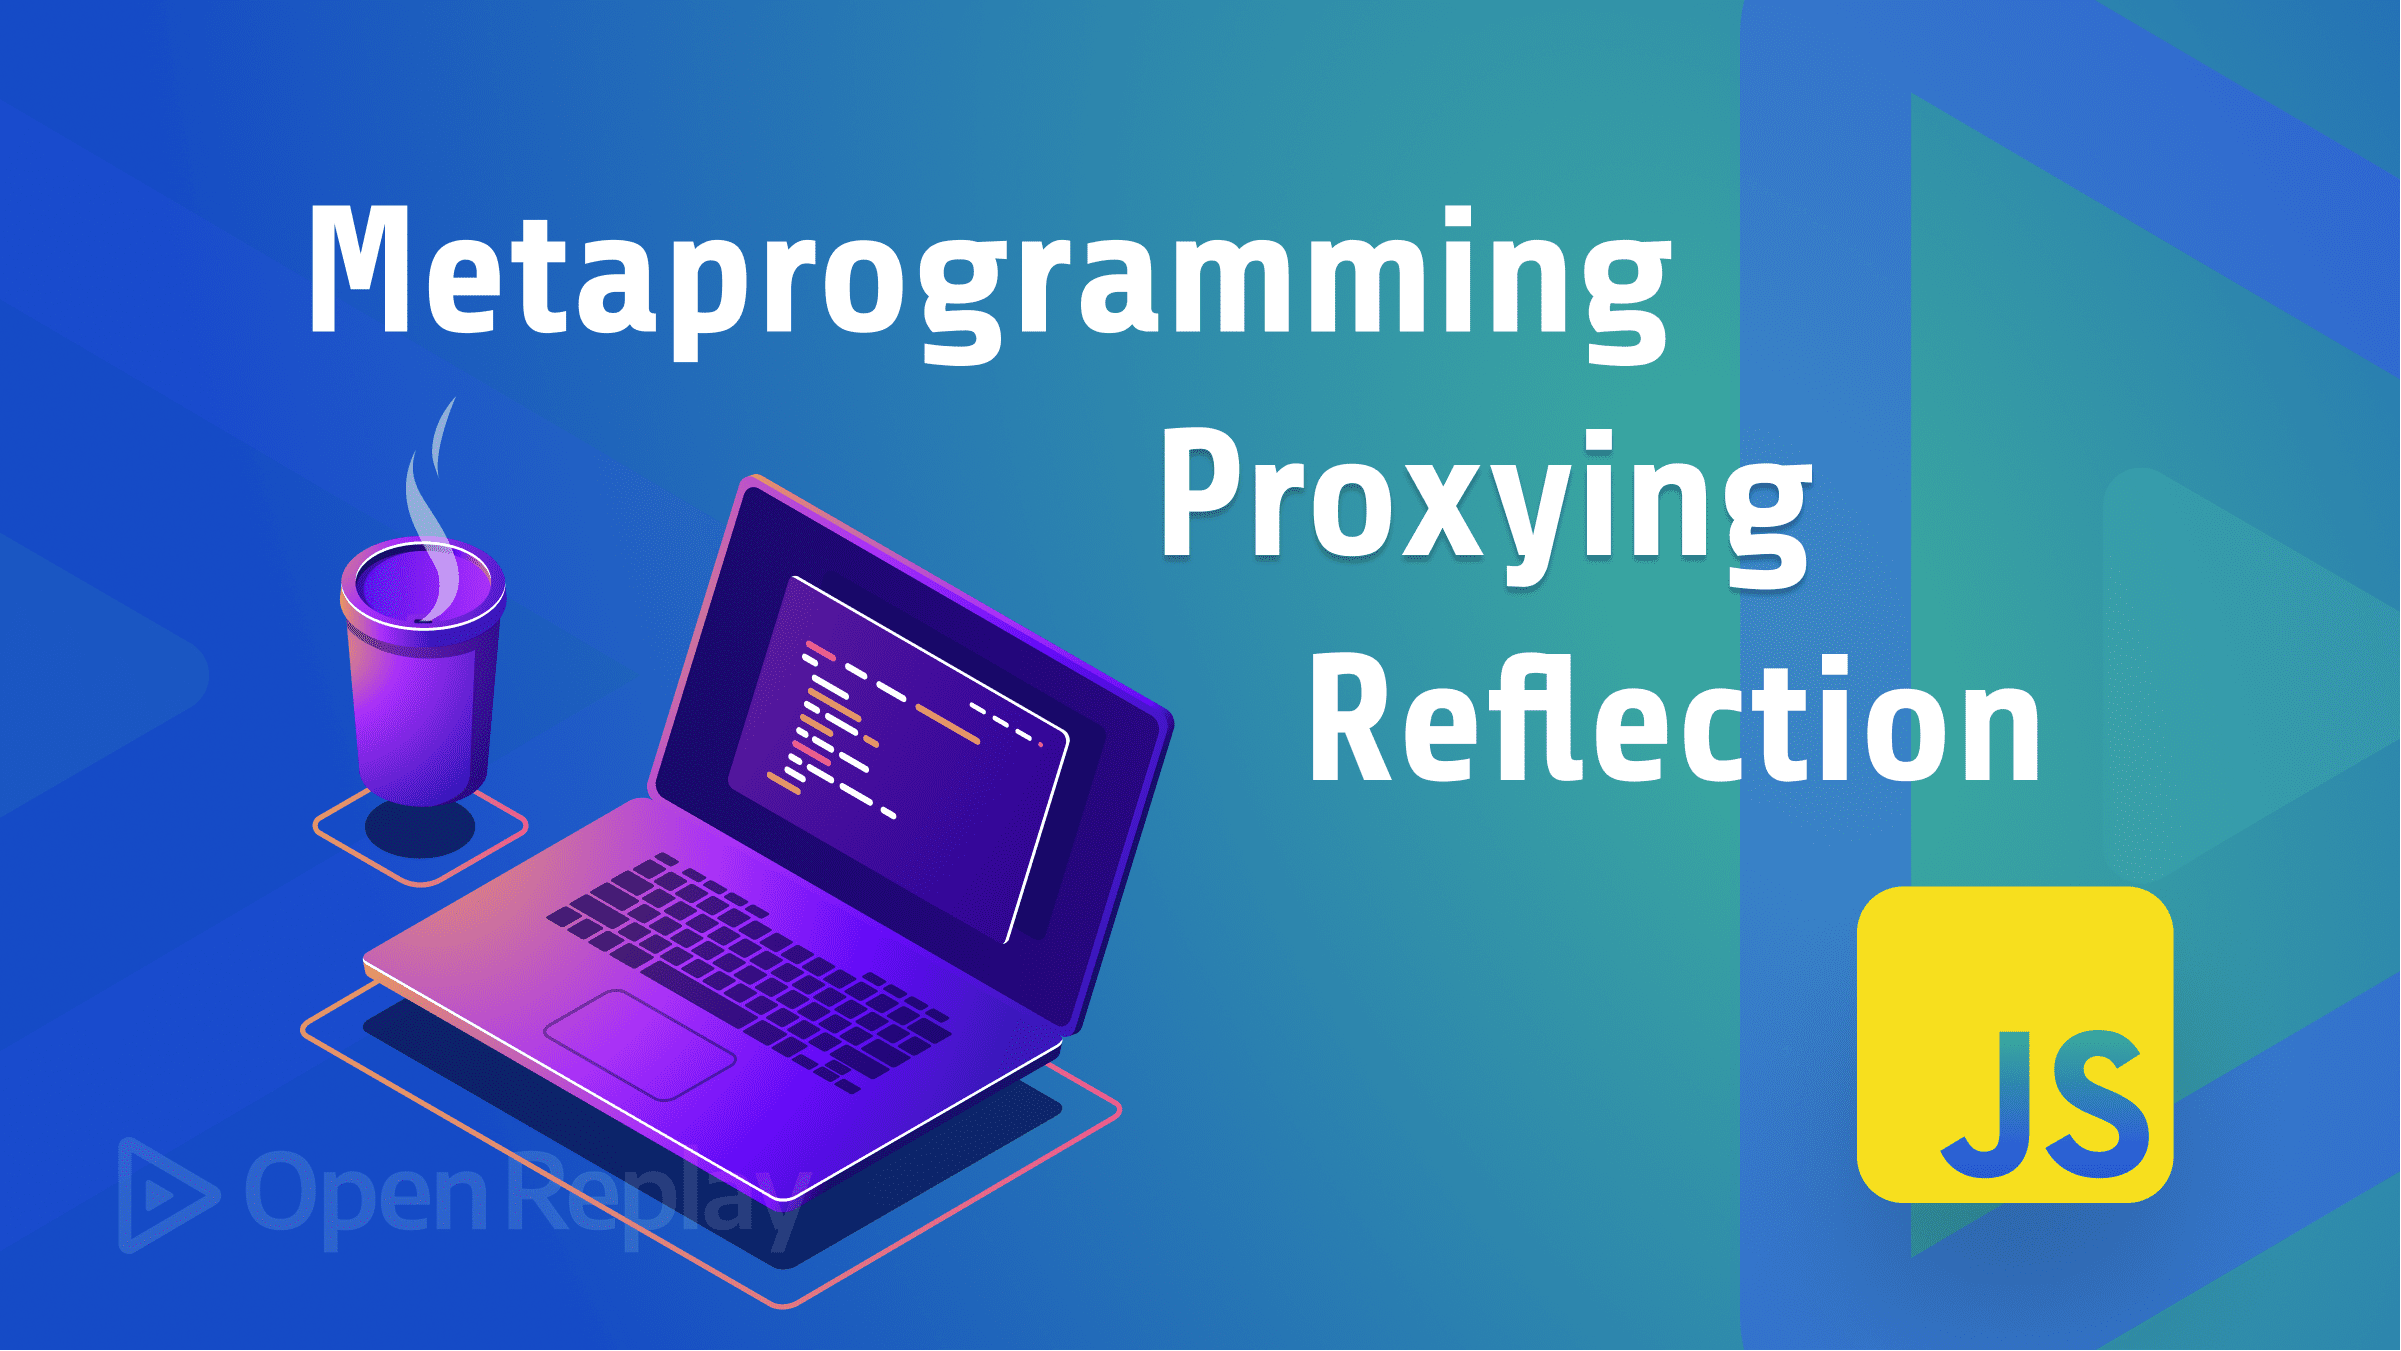 Exploring Metaprogramming, Proxying and Reflection in JavaScript